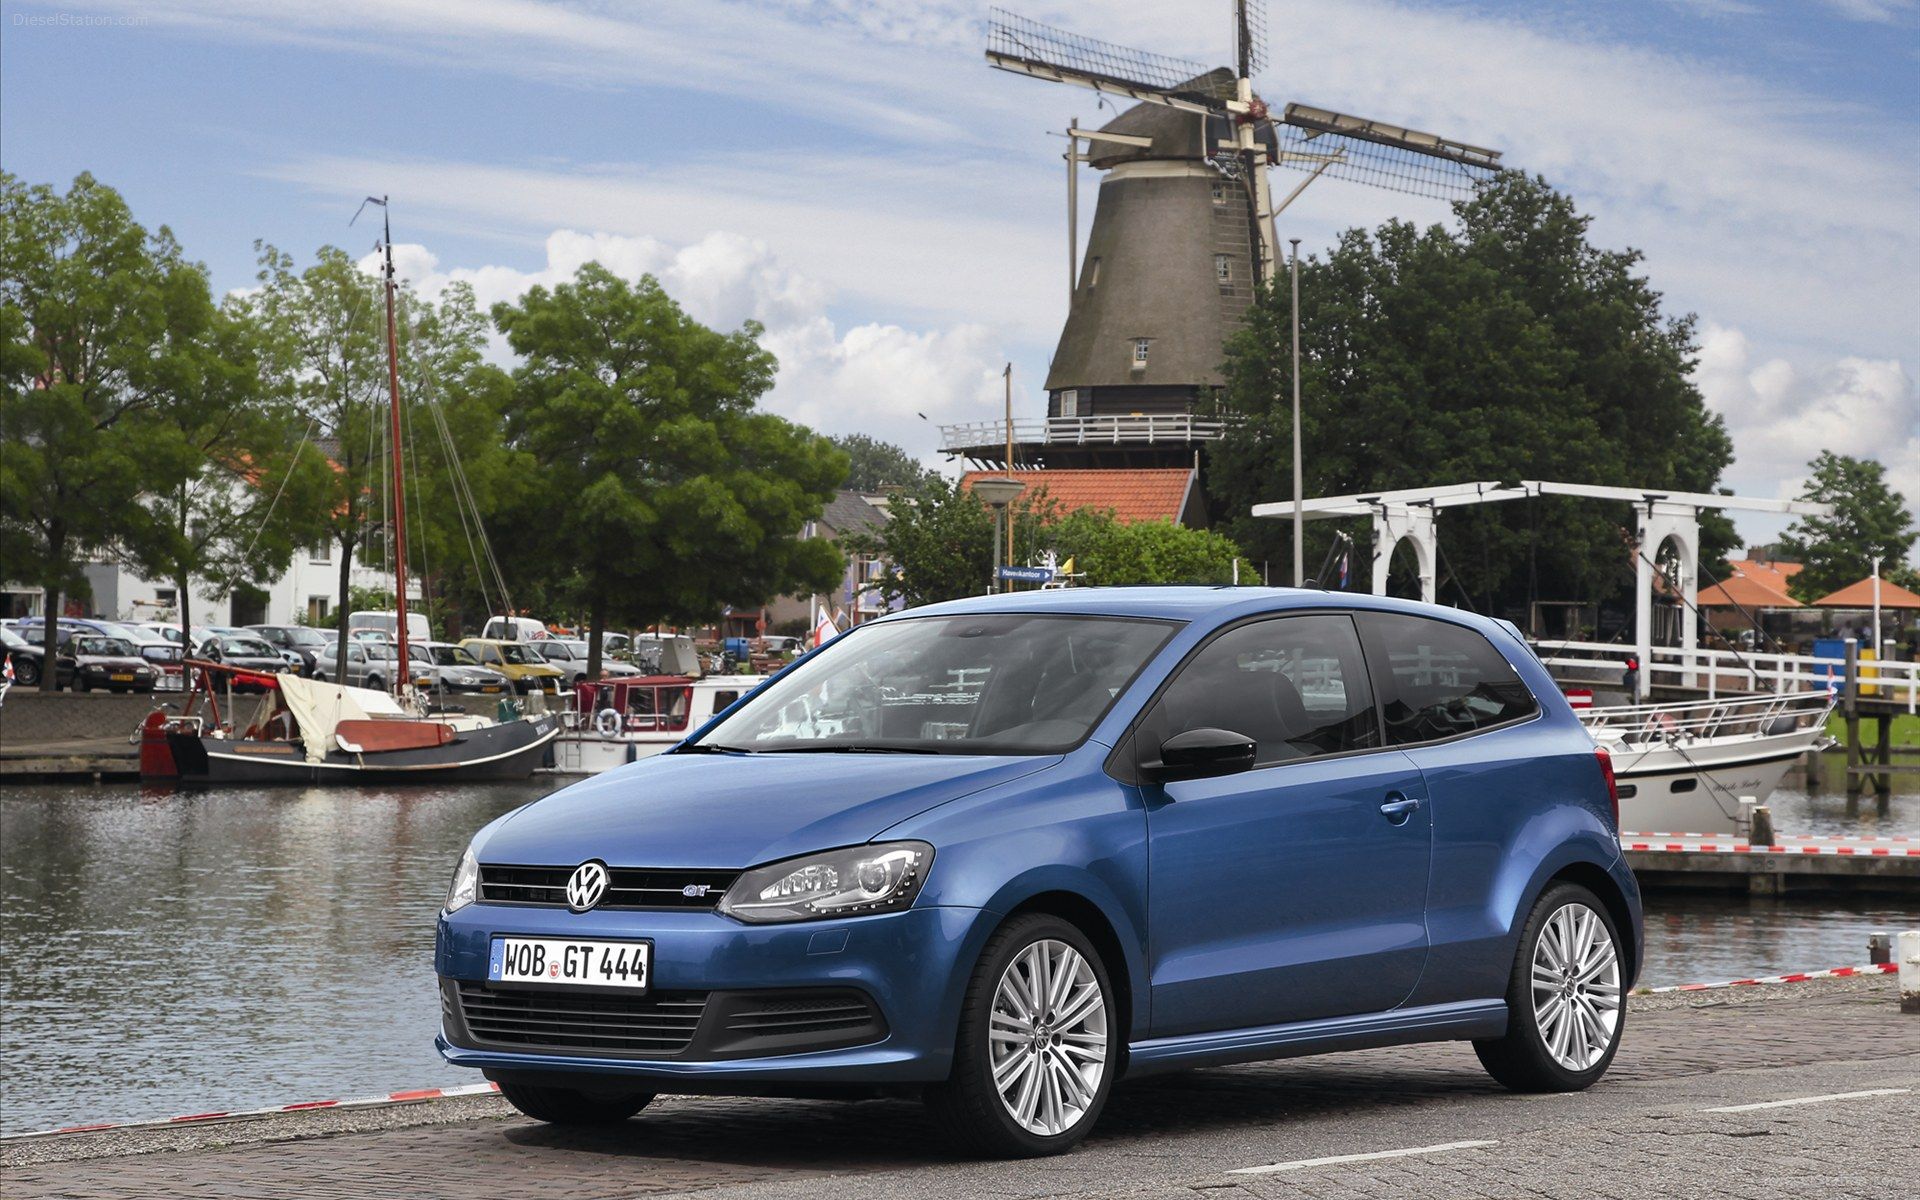 Volkswagen Polo Blue GT 2013 Widescreen Exotic Car Wallpaper of 68, Diesel Station